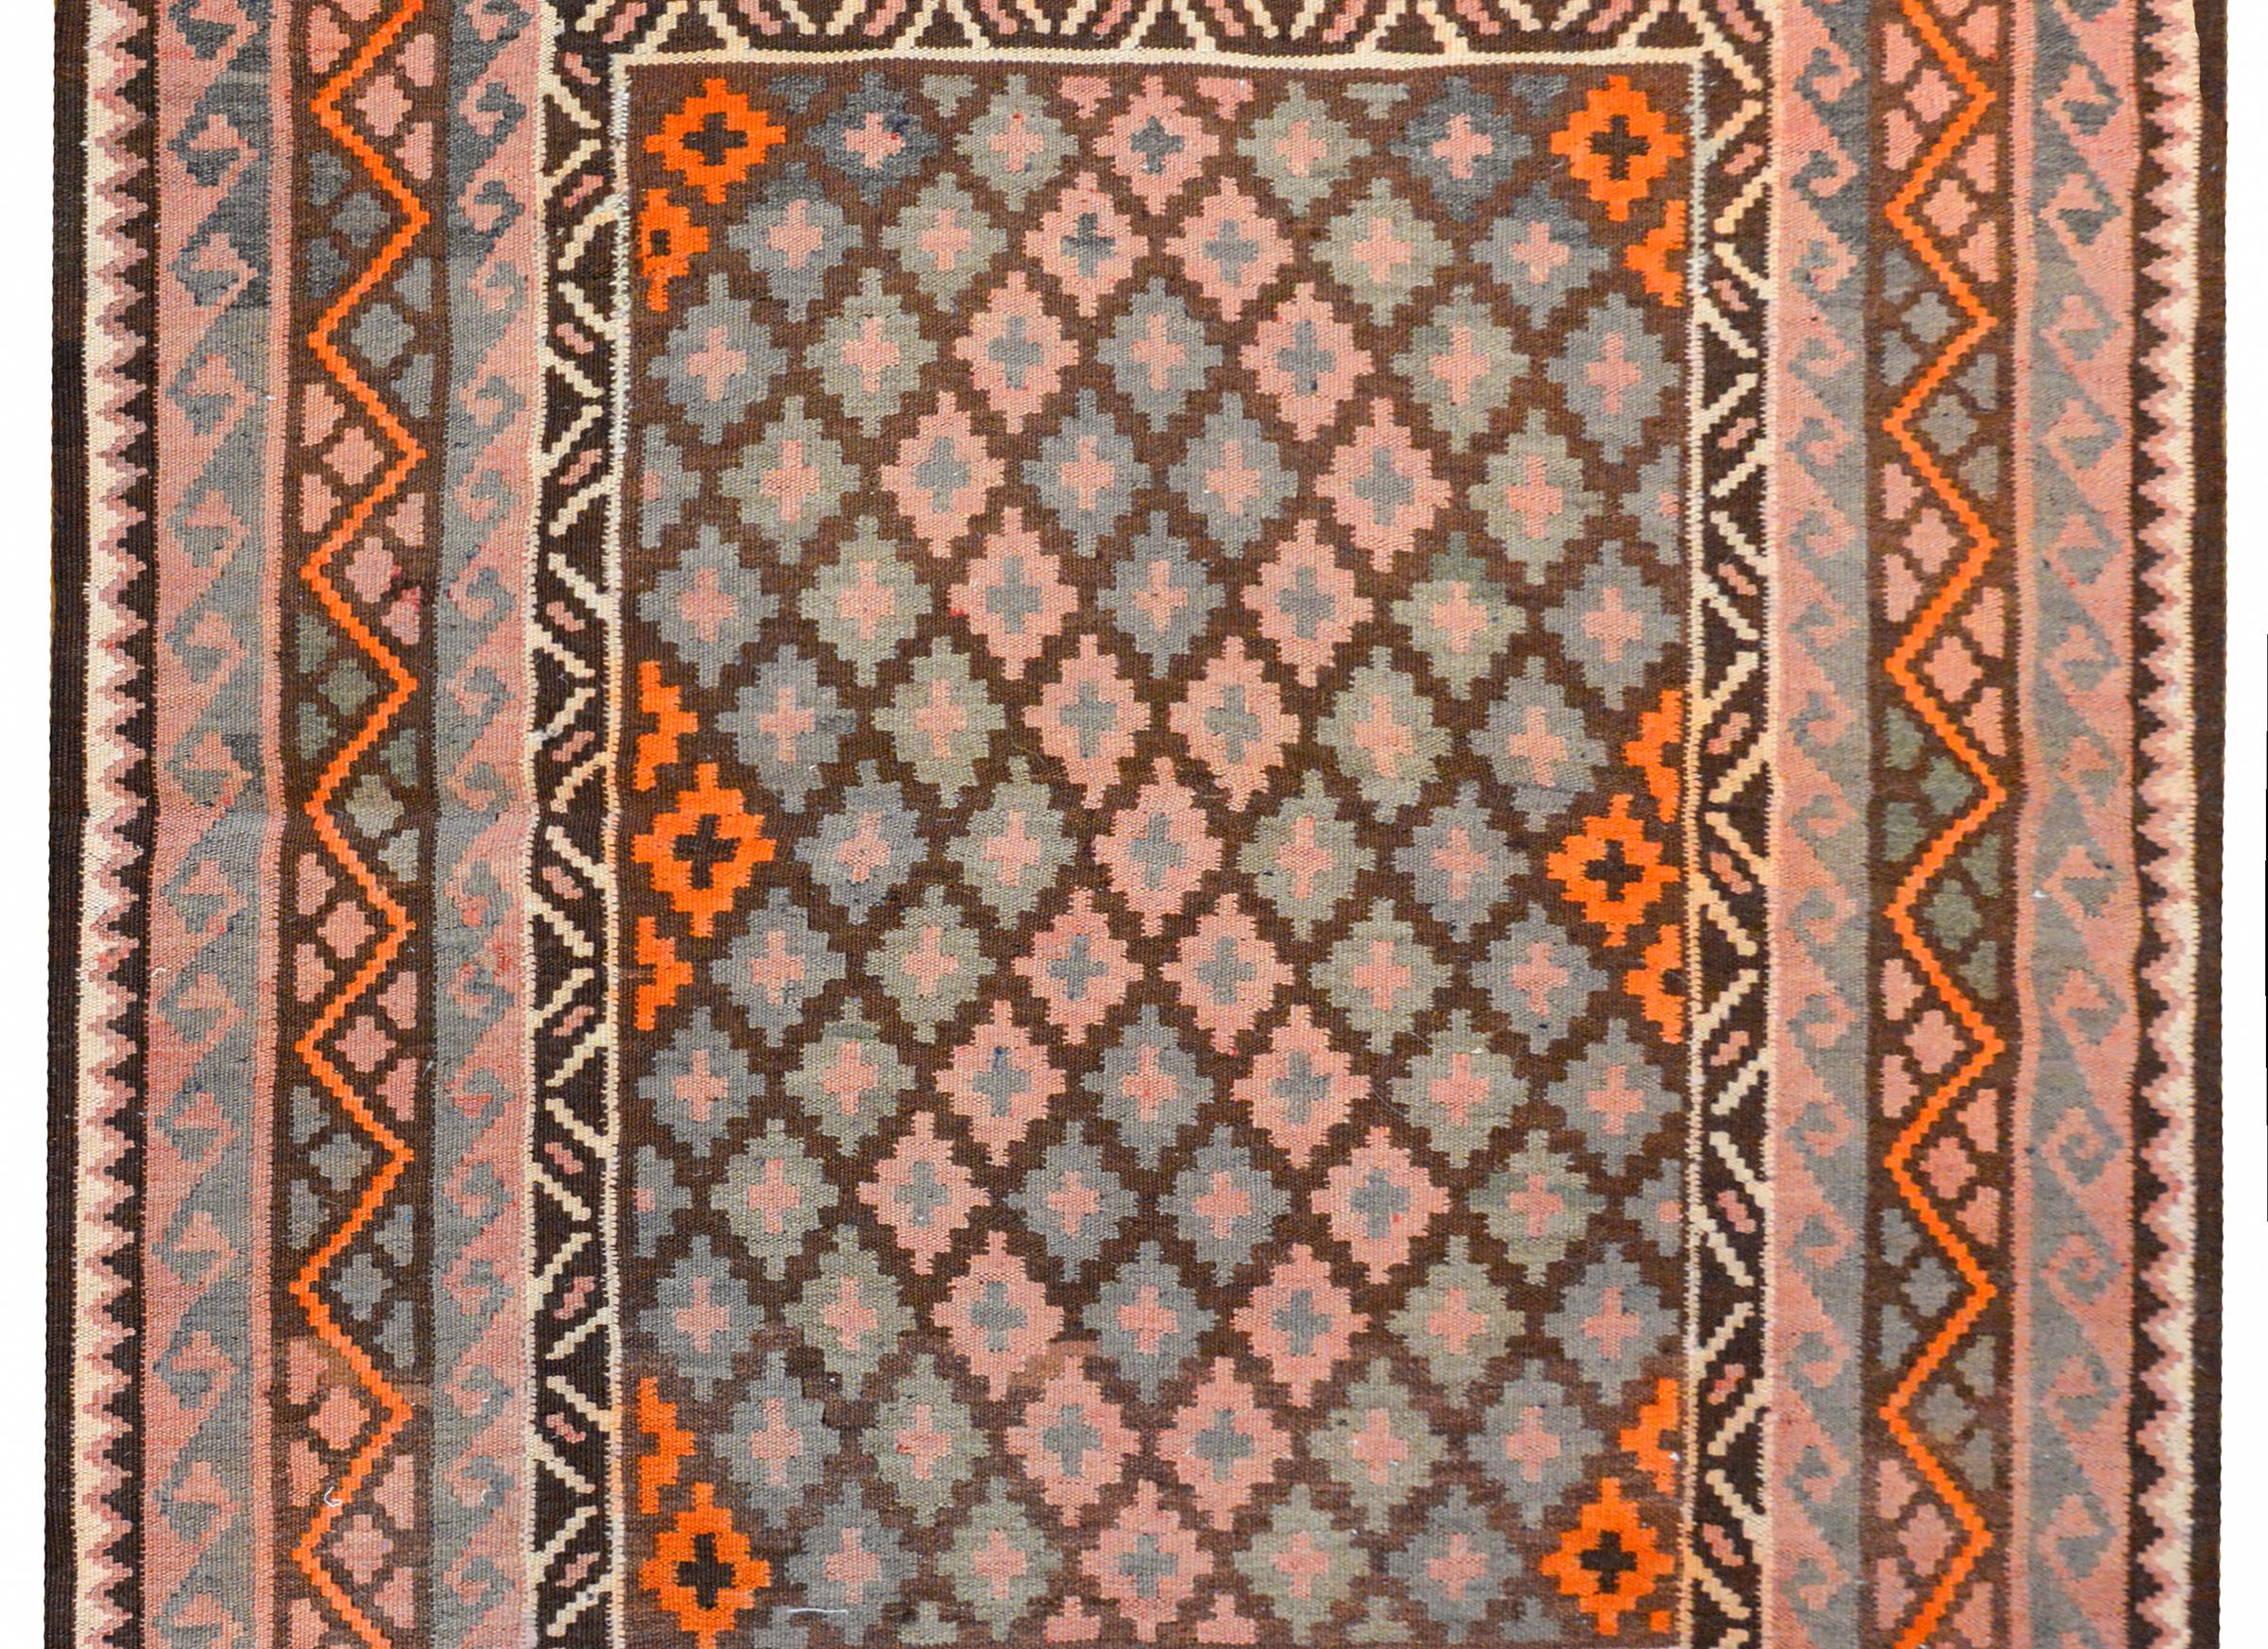 A gorgeous mid-20th century Afghani kilim with an all-over diamond pattern woven in pale indigo, green, orange, and pink vegetable dyed wool, surrounded by a complex border containing a Grecian wave pattern, with zigzags and triangles, all woven in